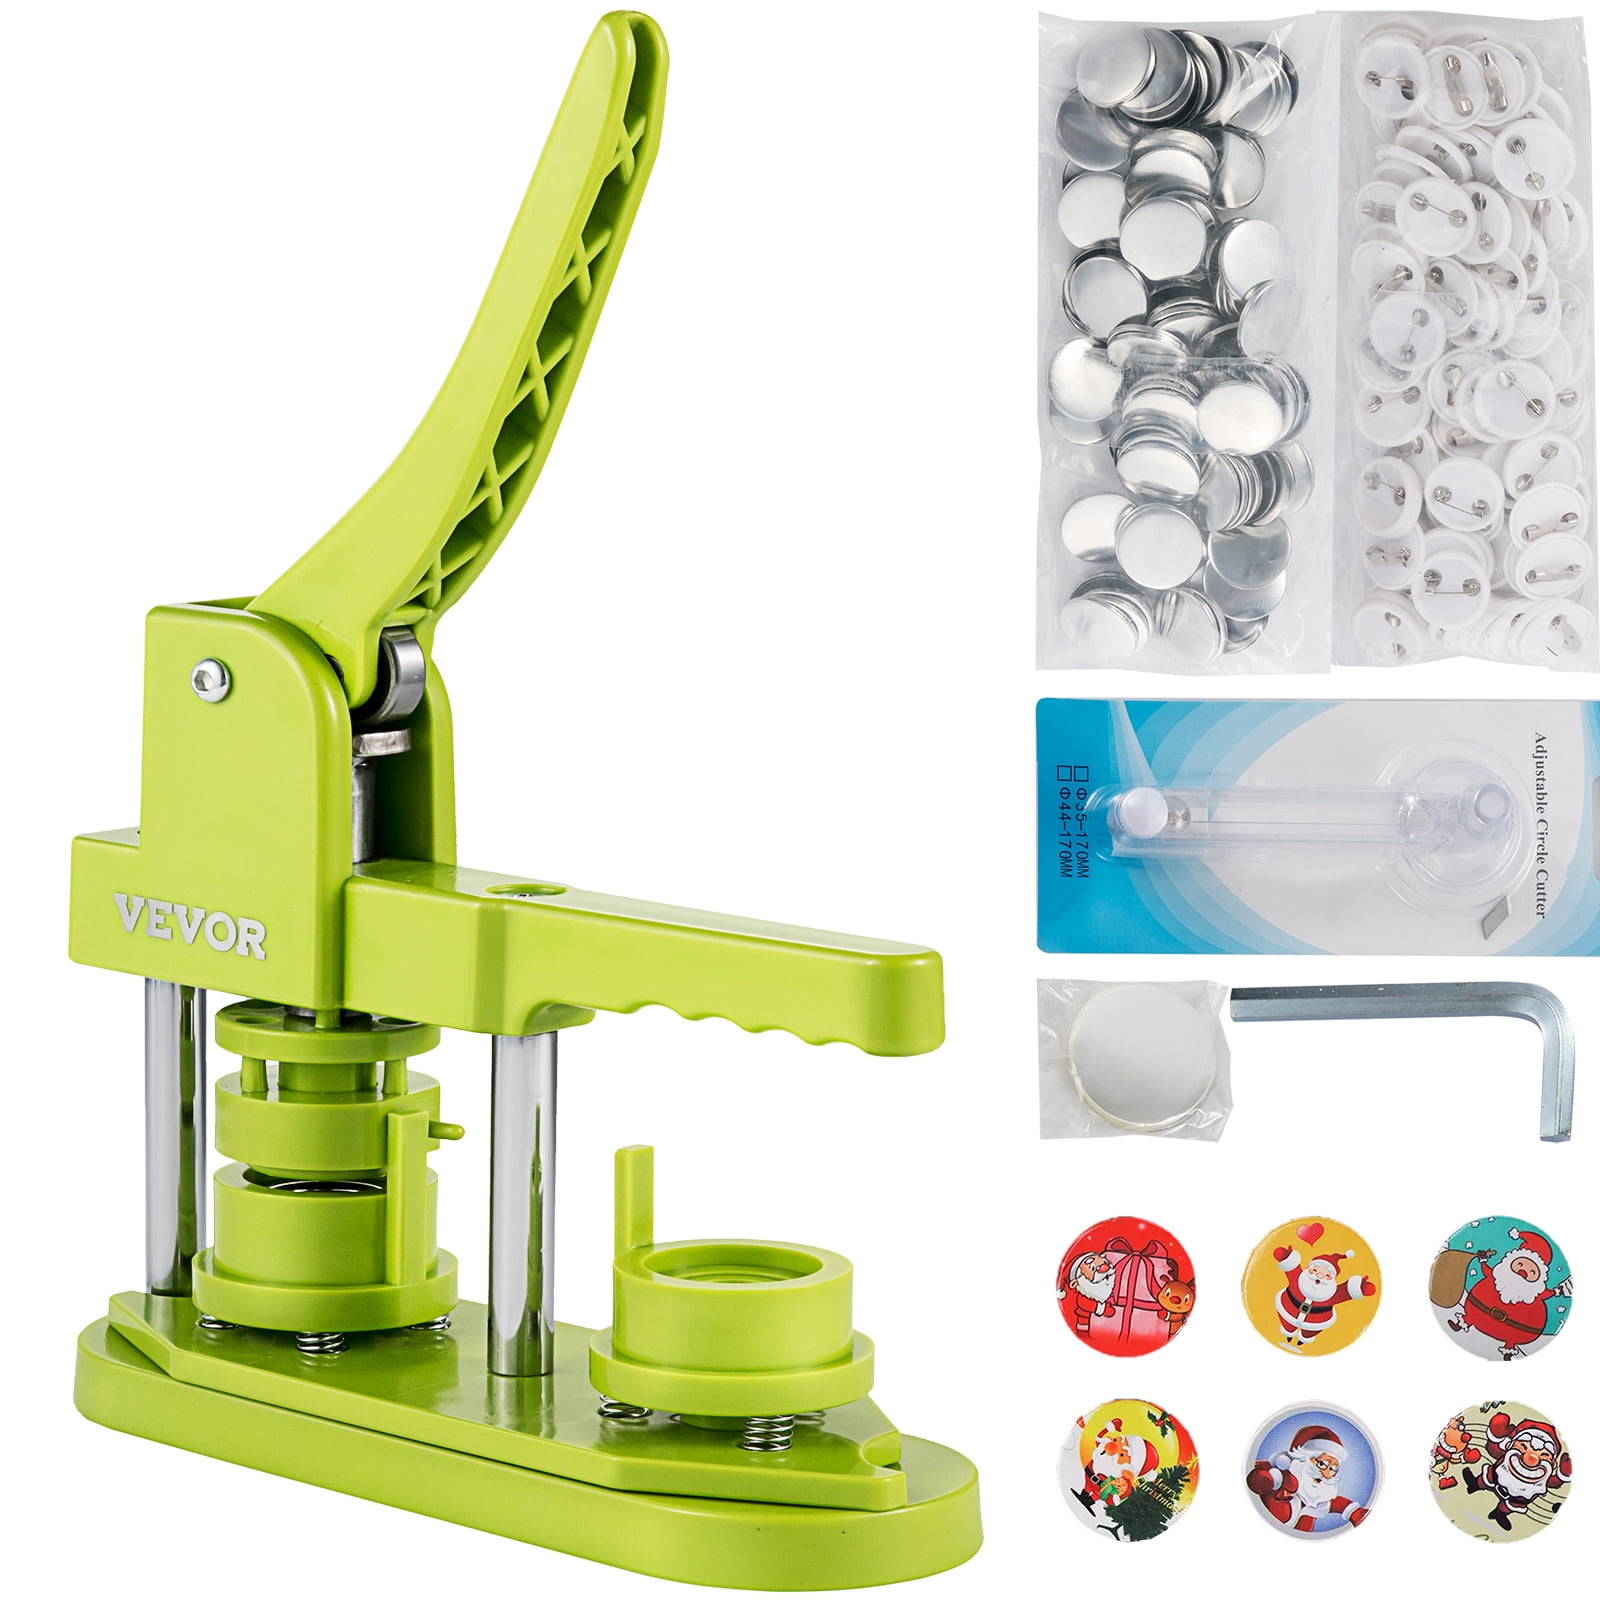 PROFESSIONAL BUTTON MAKING PRESS COVER MACHINE+2 FREE DIE & 100 BUTTON OF CHOICE 